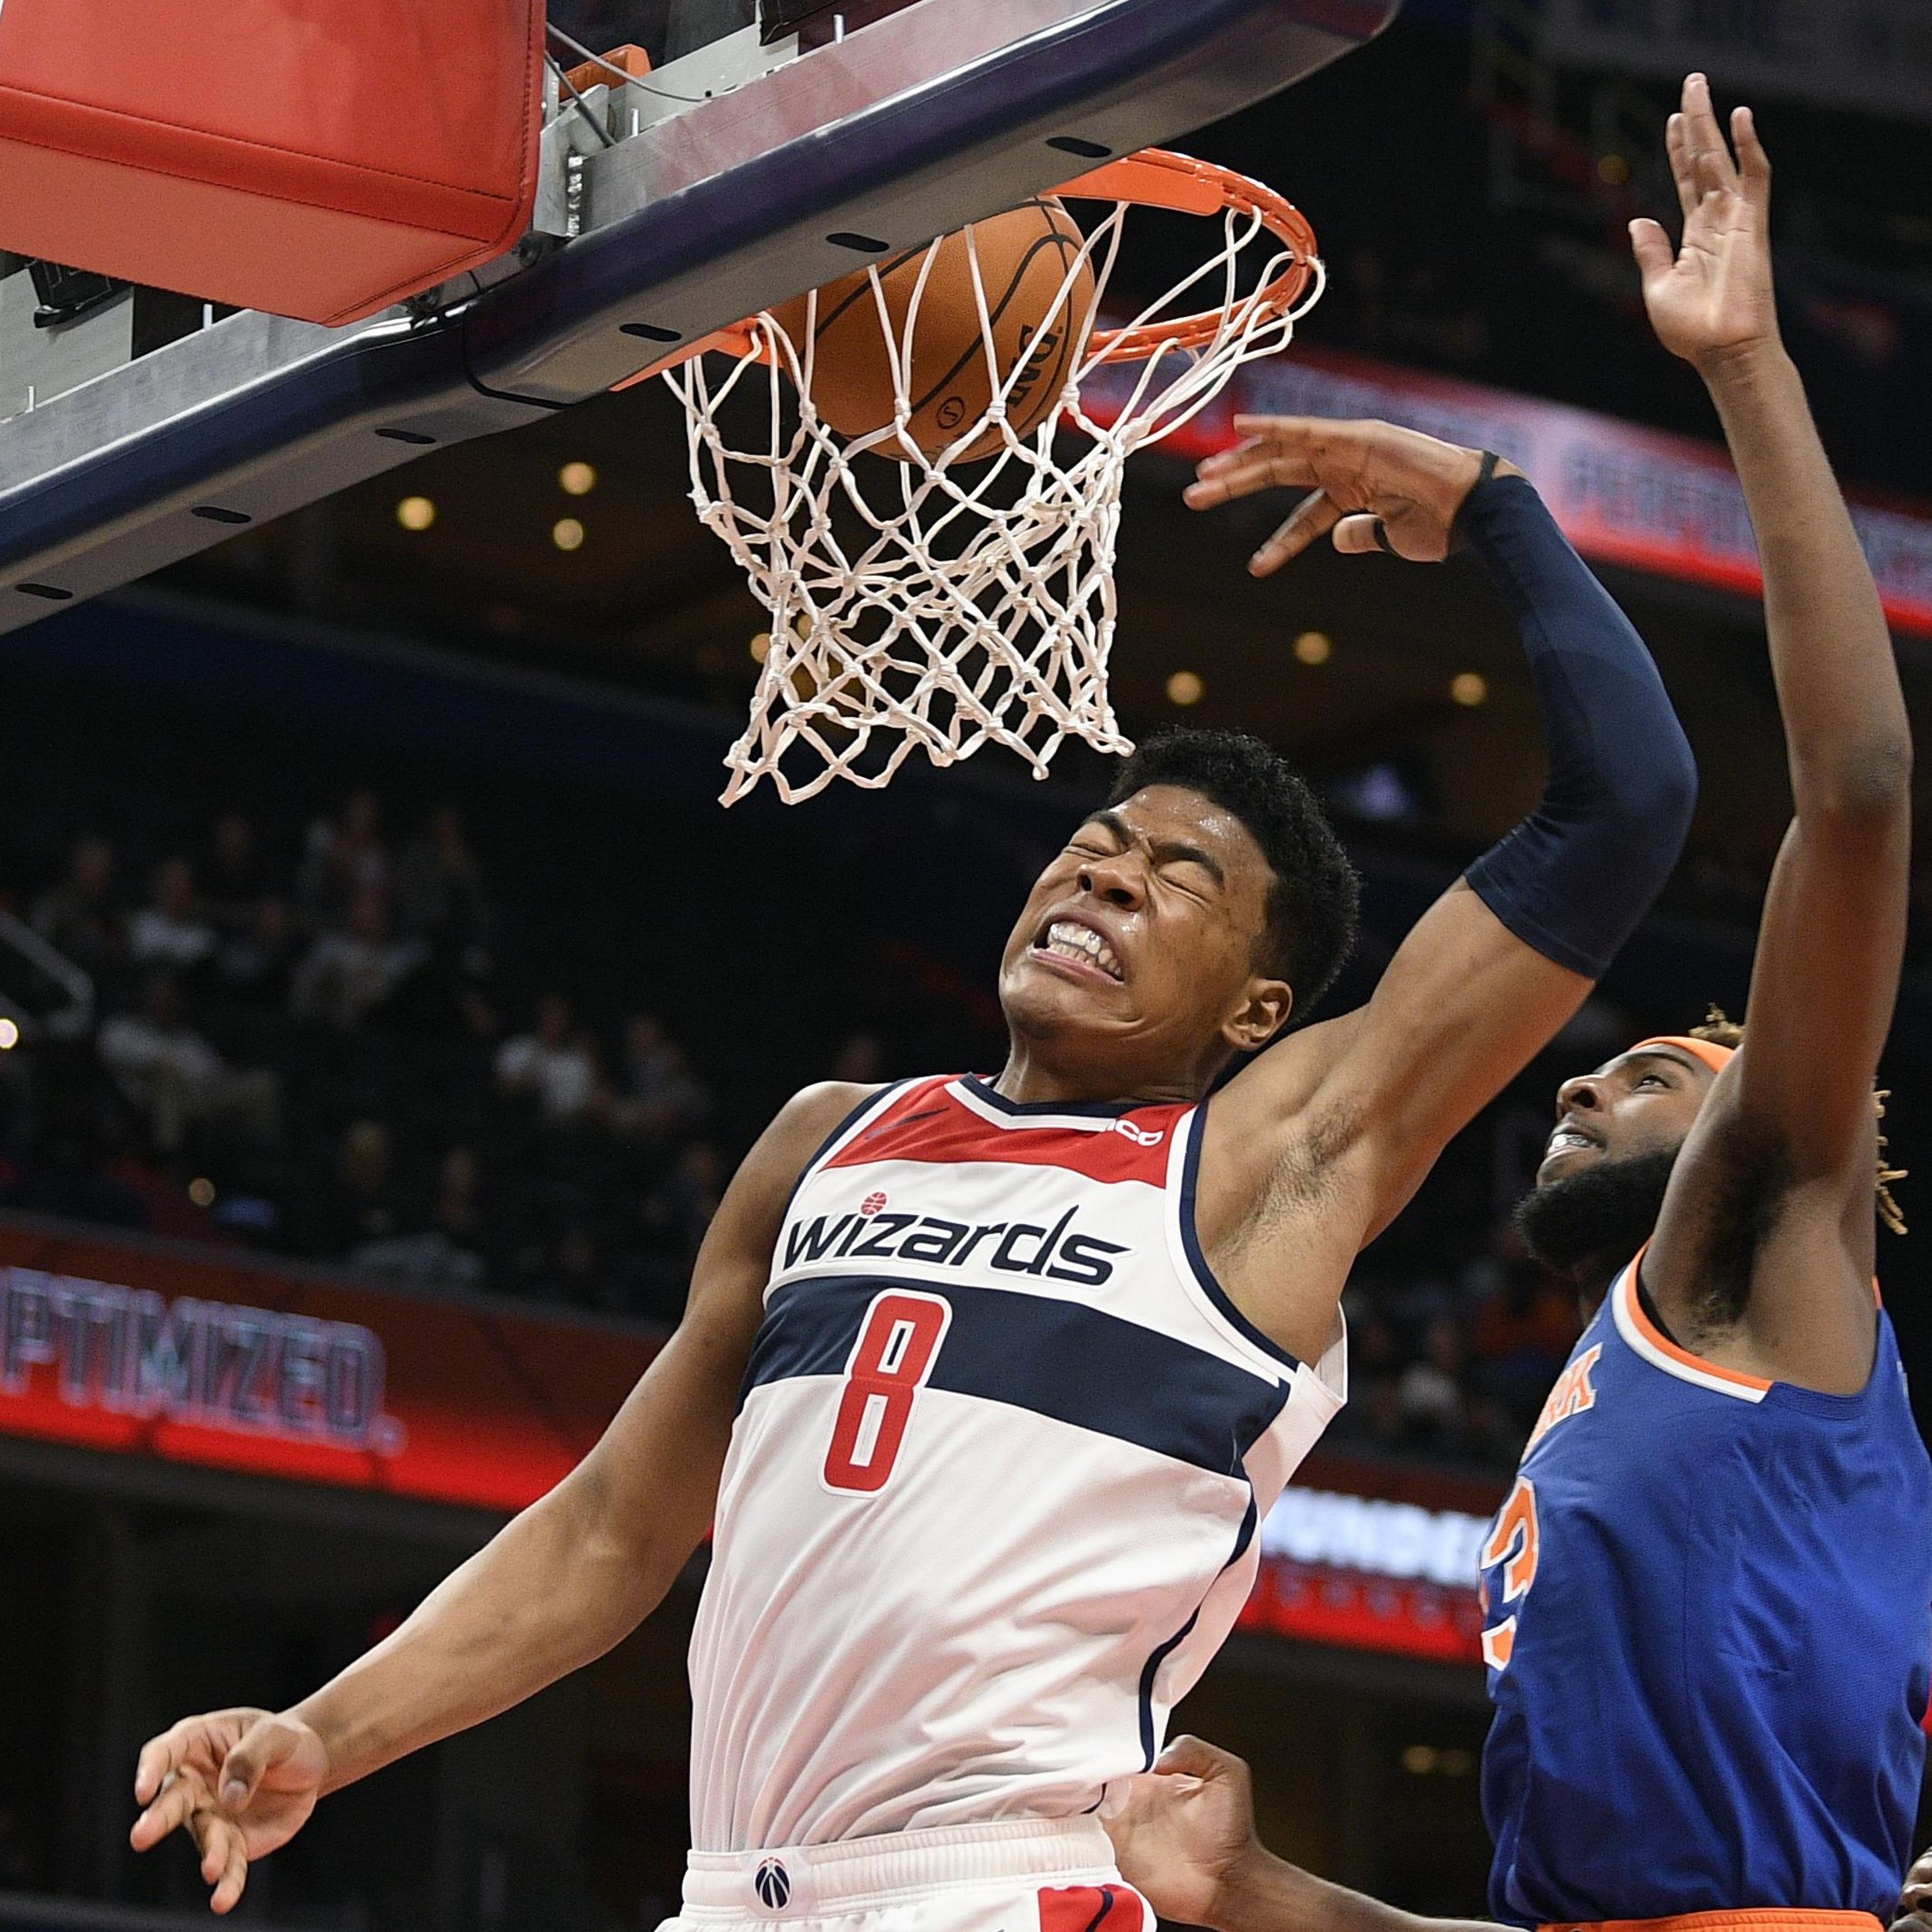 Wizards rookie Rui Hachimura growing with each game in NBA